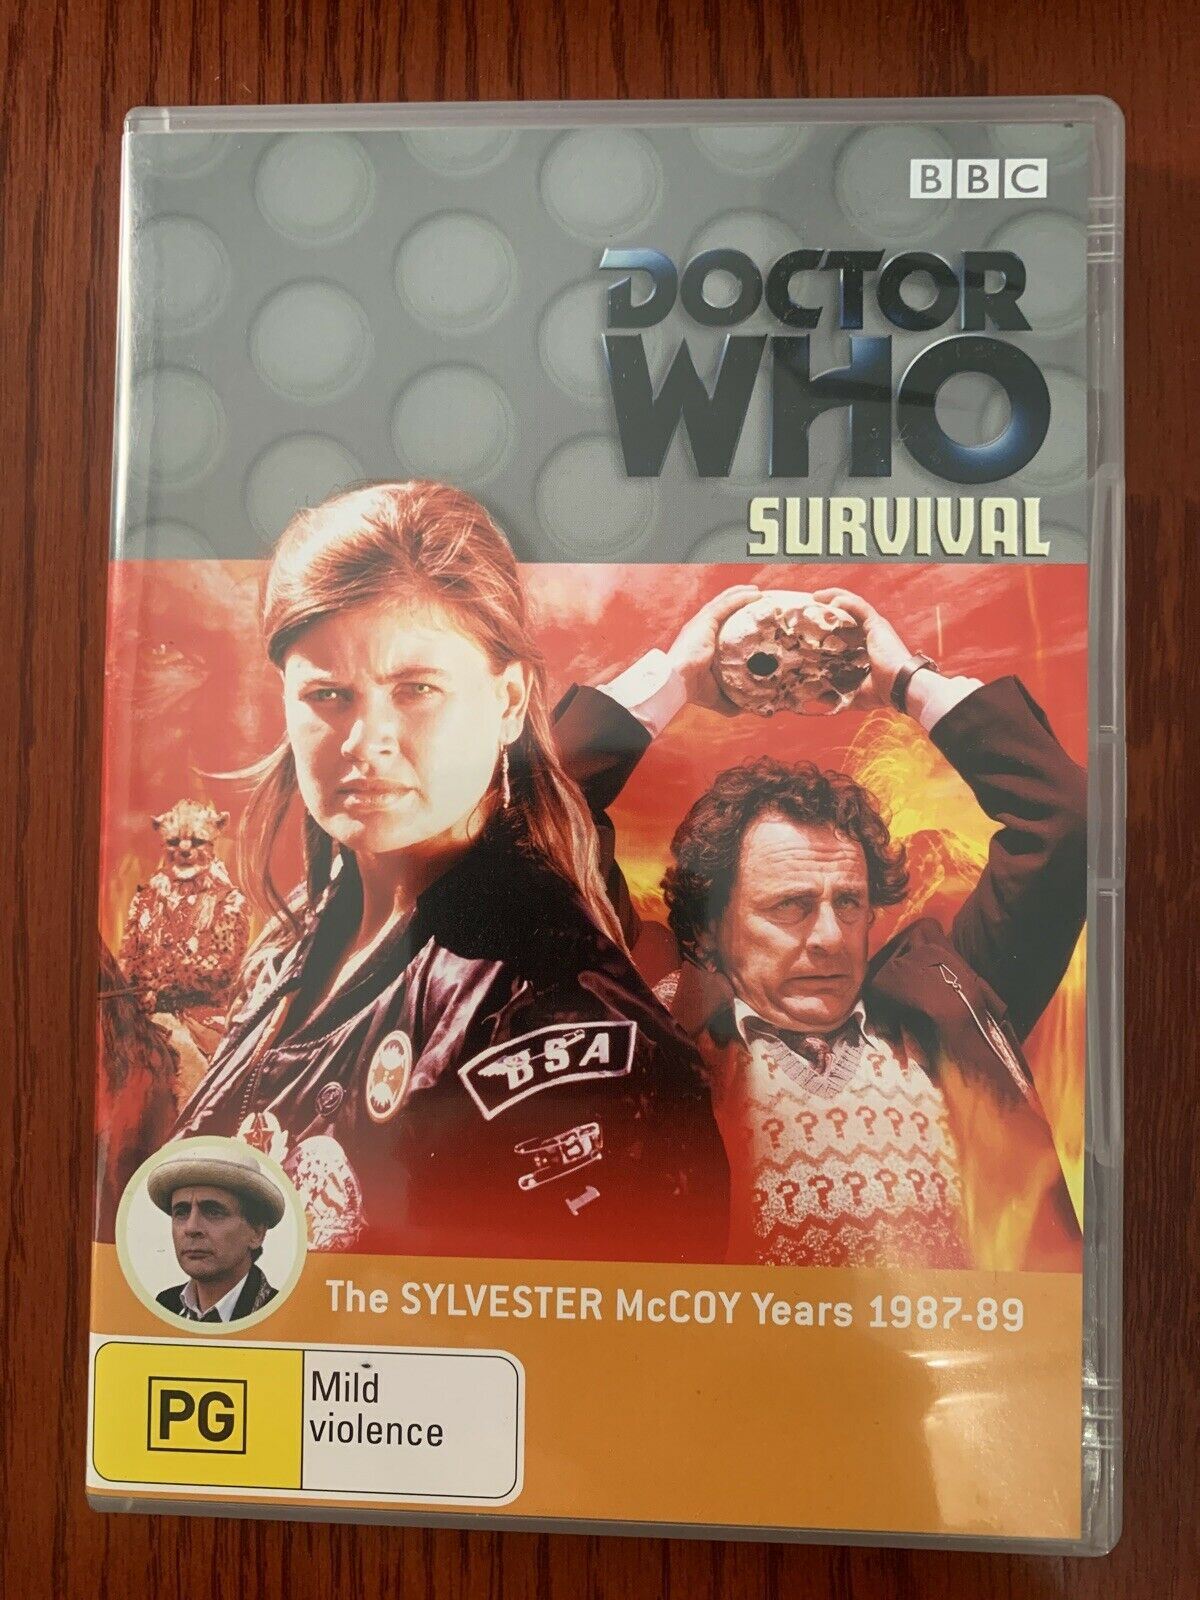 Doctor Who - Survival - The Sylvester McCoy Years 1987-89 (DVD, 2007) Region 4